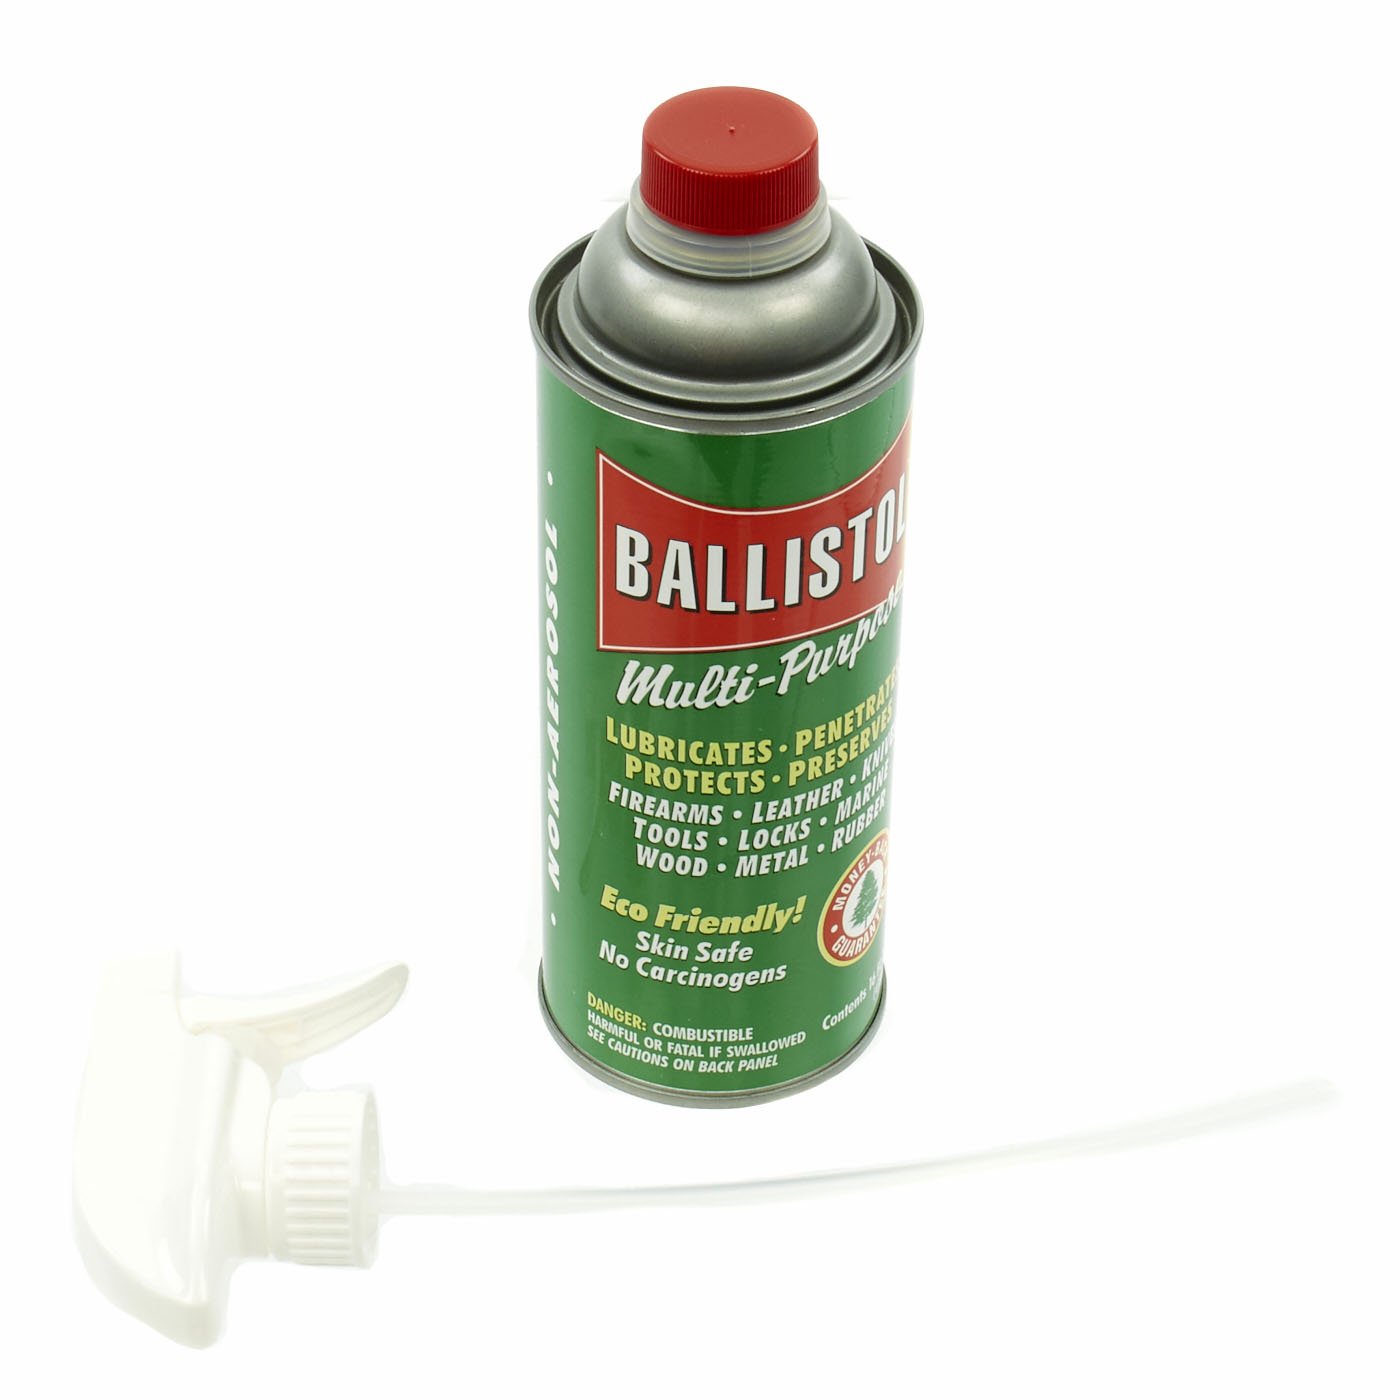 3-Pack Ballistol 16 oz Multi-Purpose Oil Lubricant Cleaner and Protect